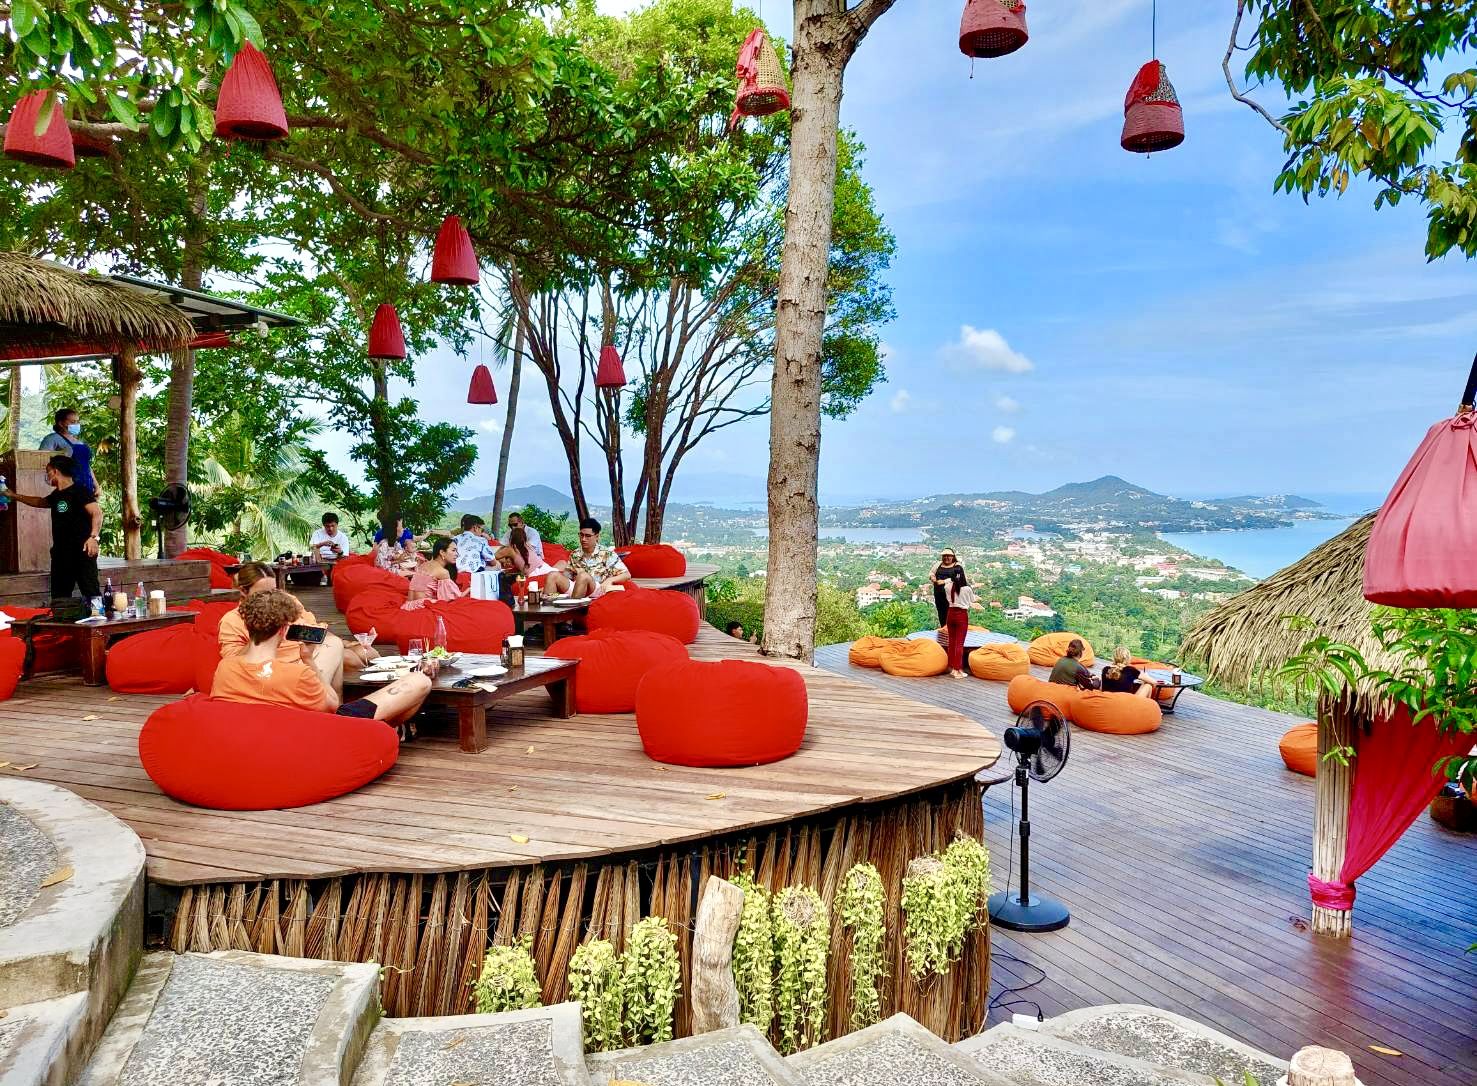 The Jungle Club is 'the' place to watch the sun go down over the island of Koh Samui. 